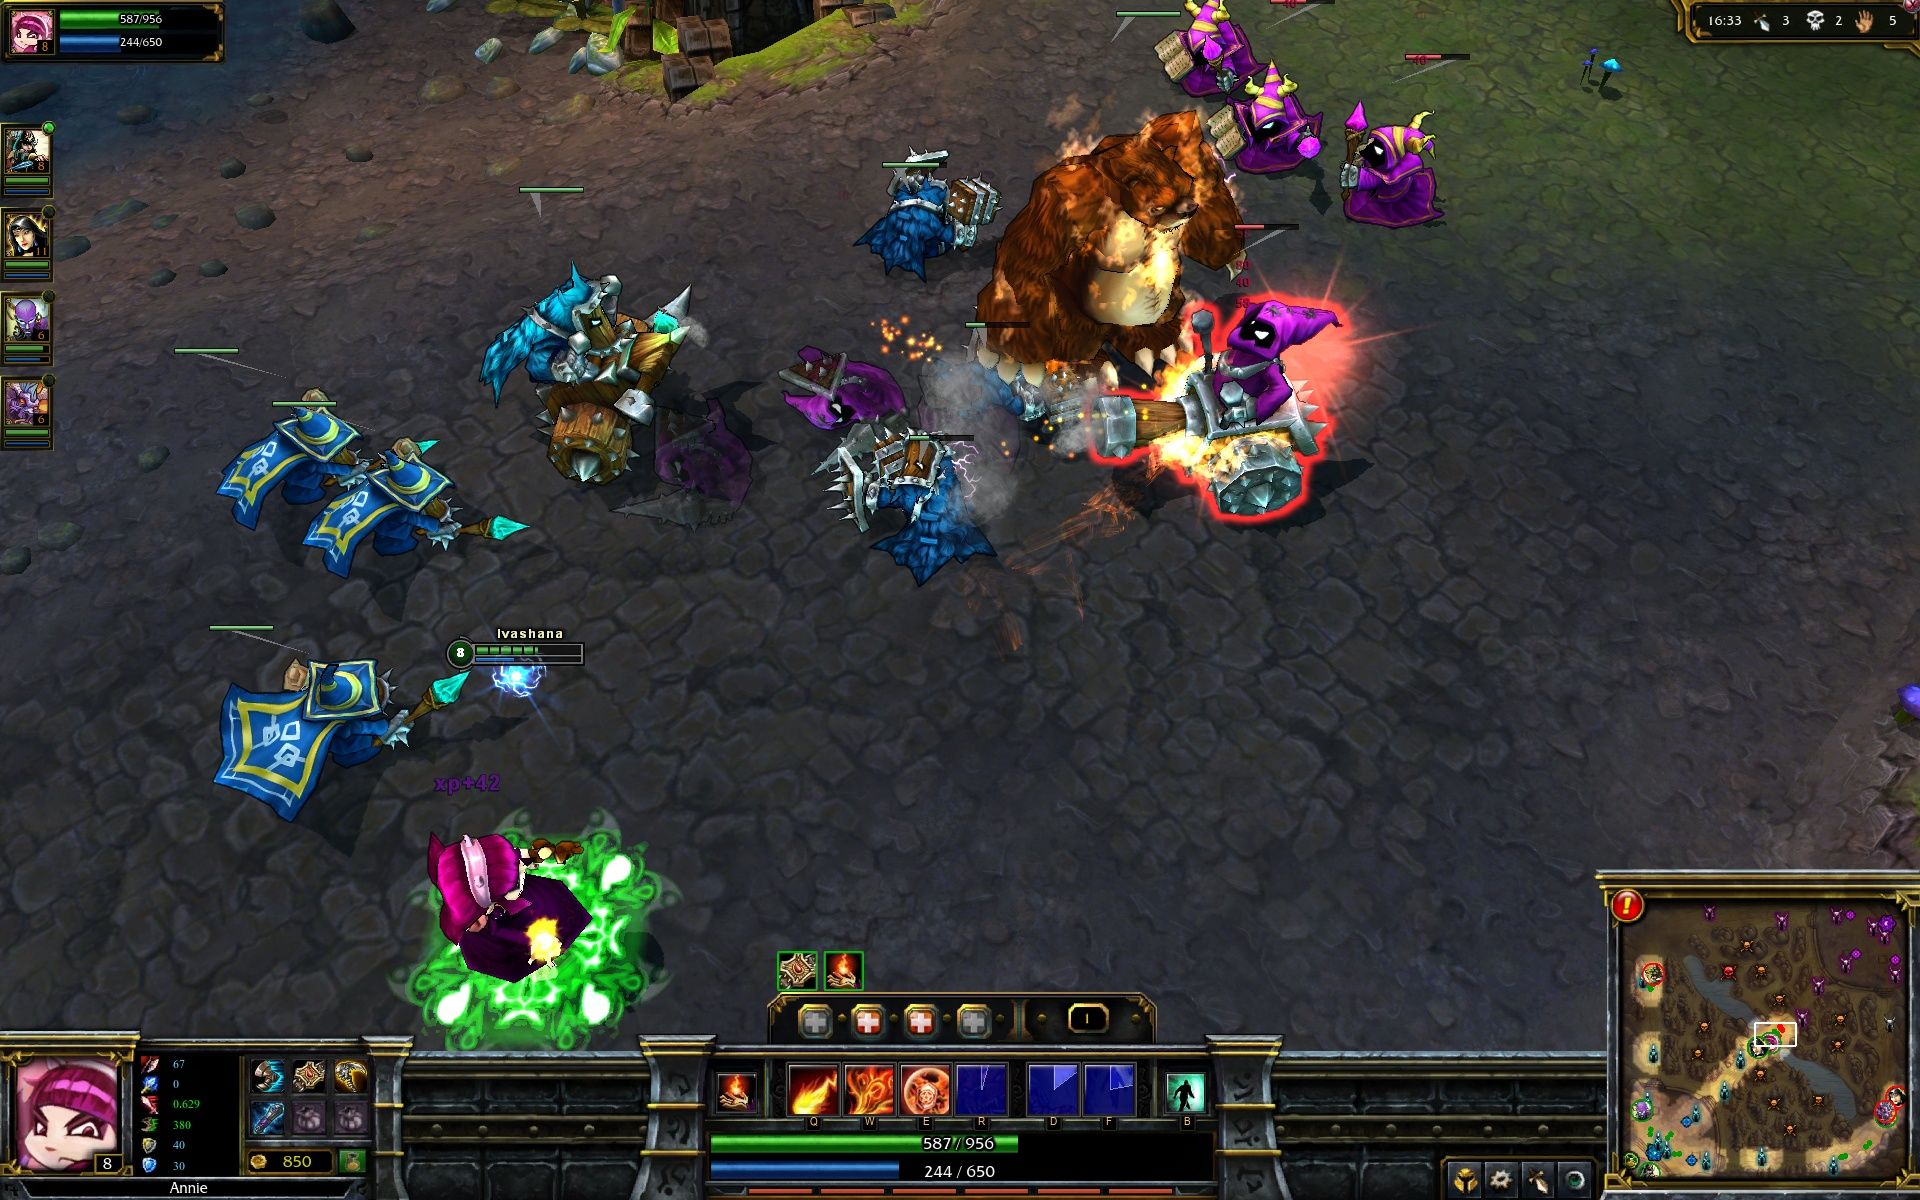 A screenshot of a League of Legends game in action